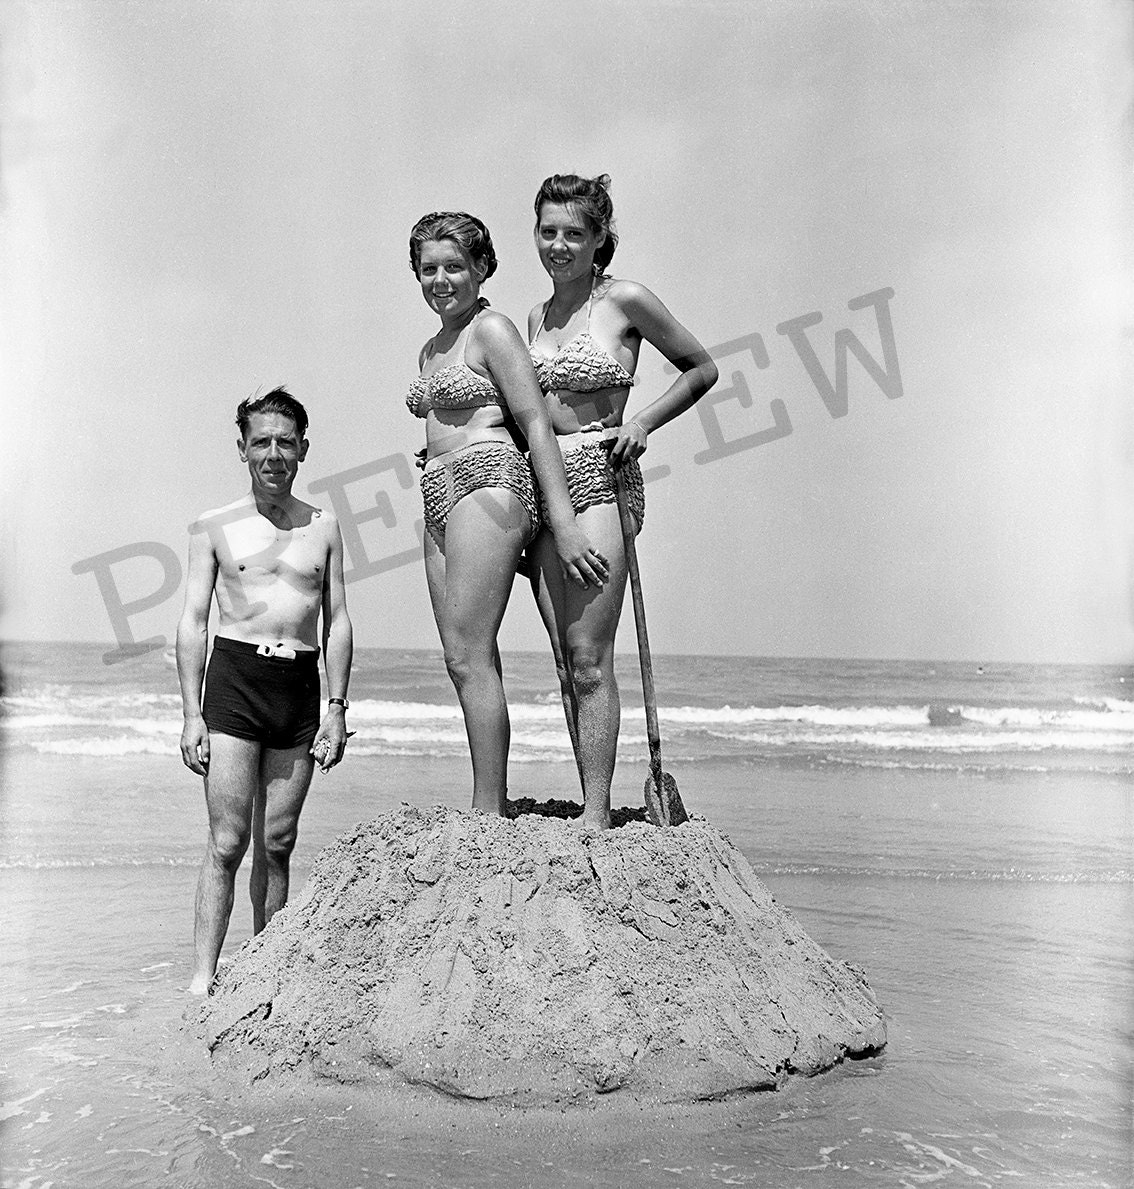 Girls on a Sand Volcano 40s Vintage Photo Instant Download